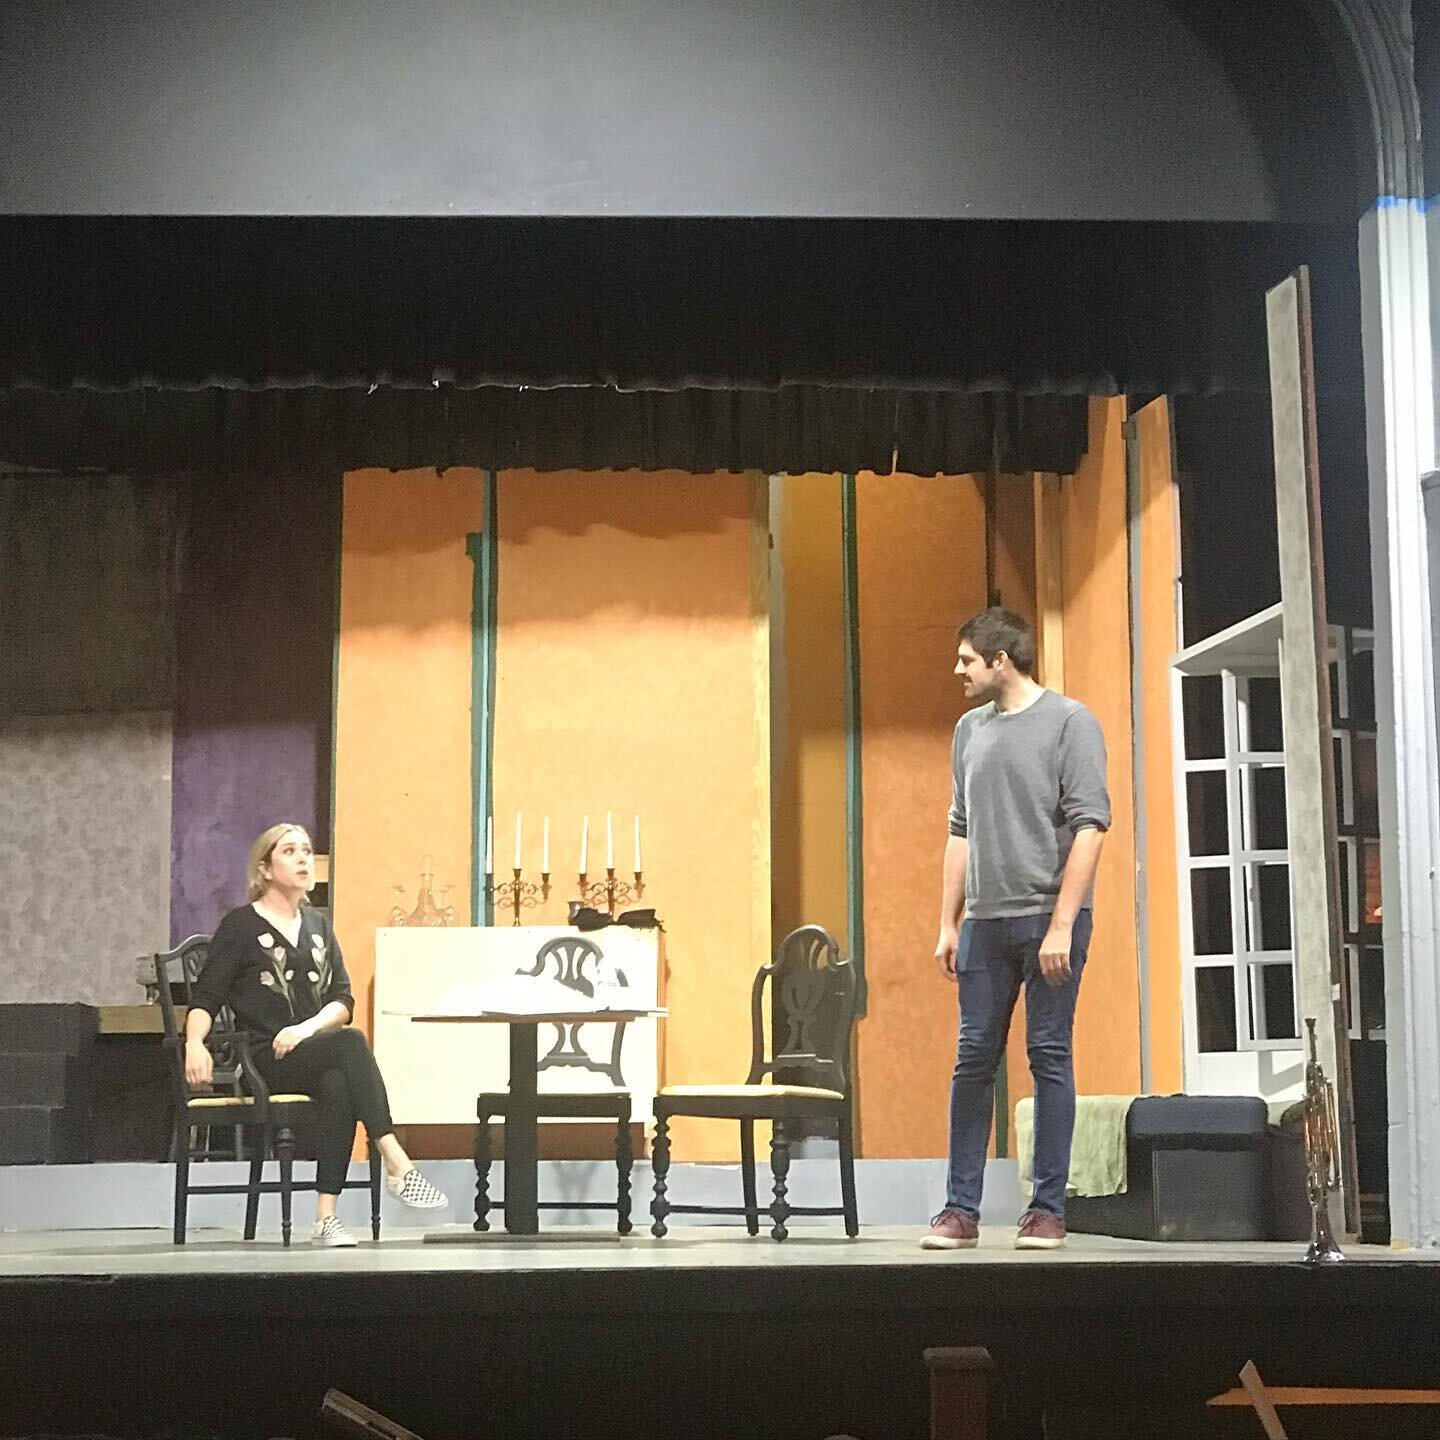 Leah Tipton and Brock Butler rehearsing Arsenic and Old Lace, opening May 13!  #communitytheatre #arsenicandoldlace #wellcrafted @experienceelkhartcountyin #experienceelkhartcoin